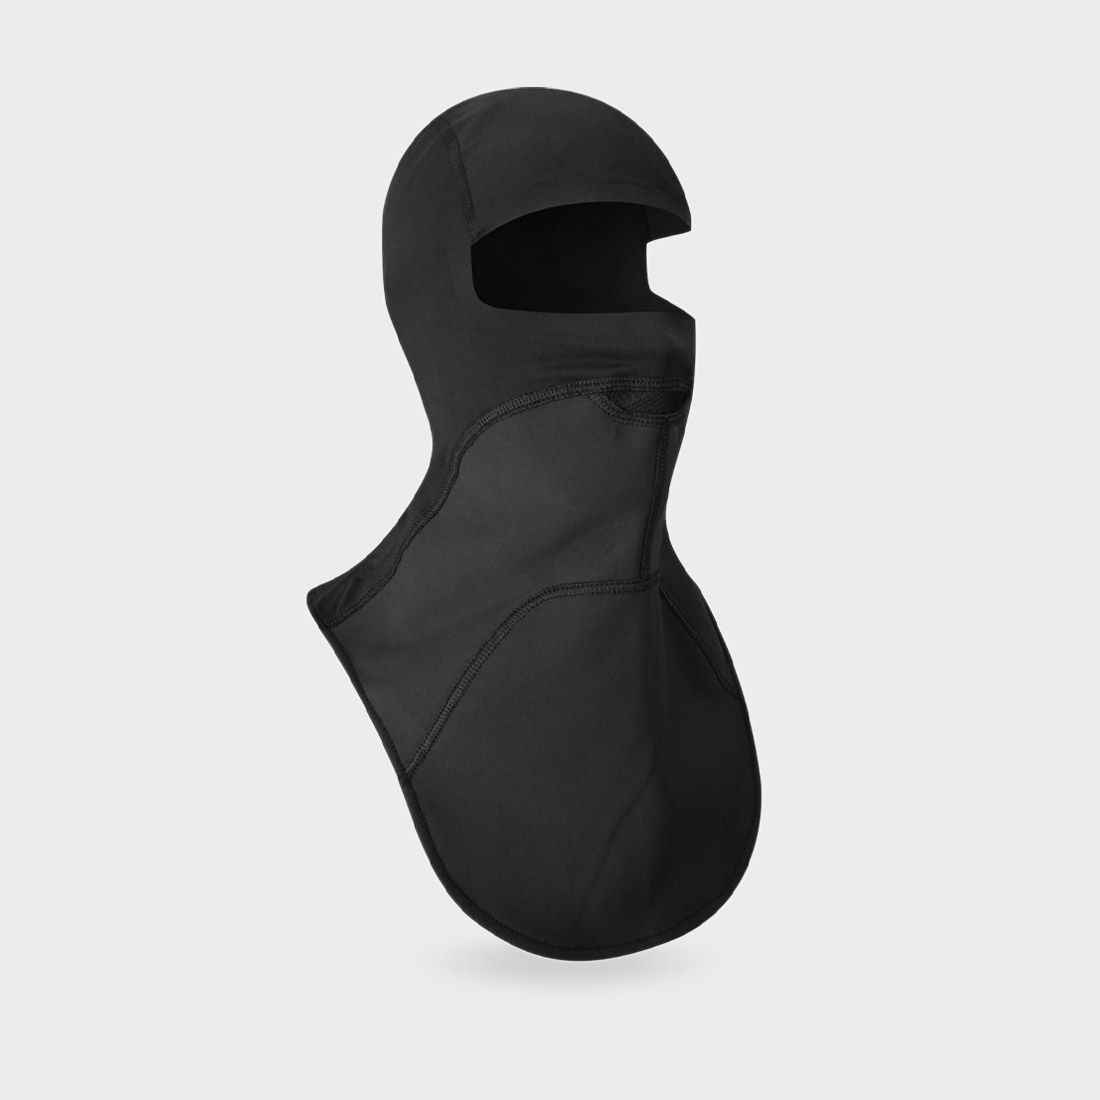 CAGOULE MOTOTECH HIVER - gearsbox